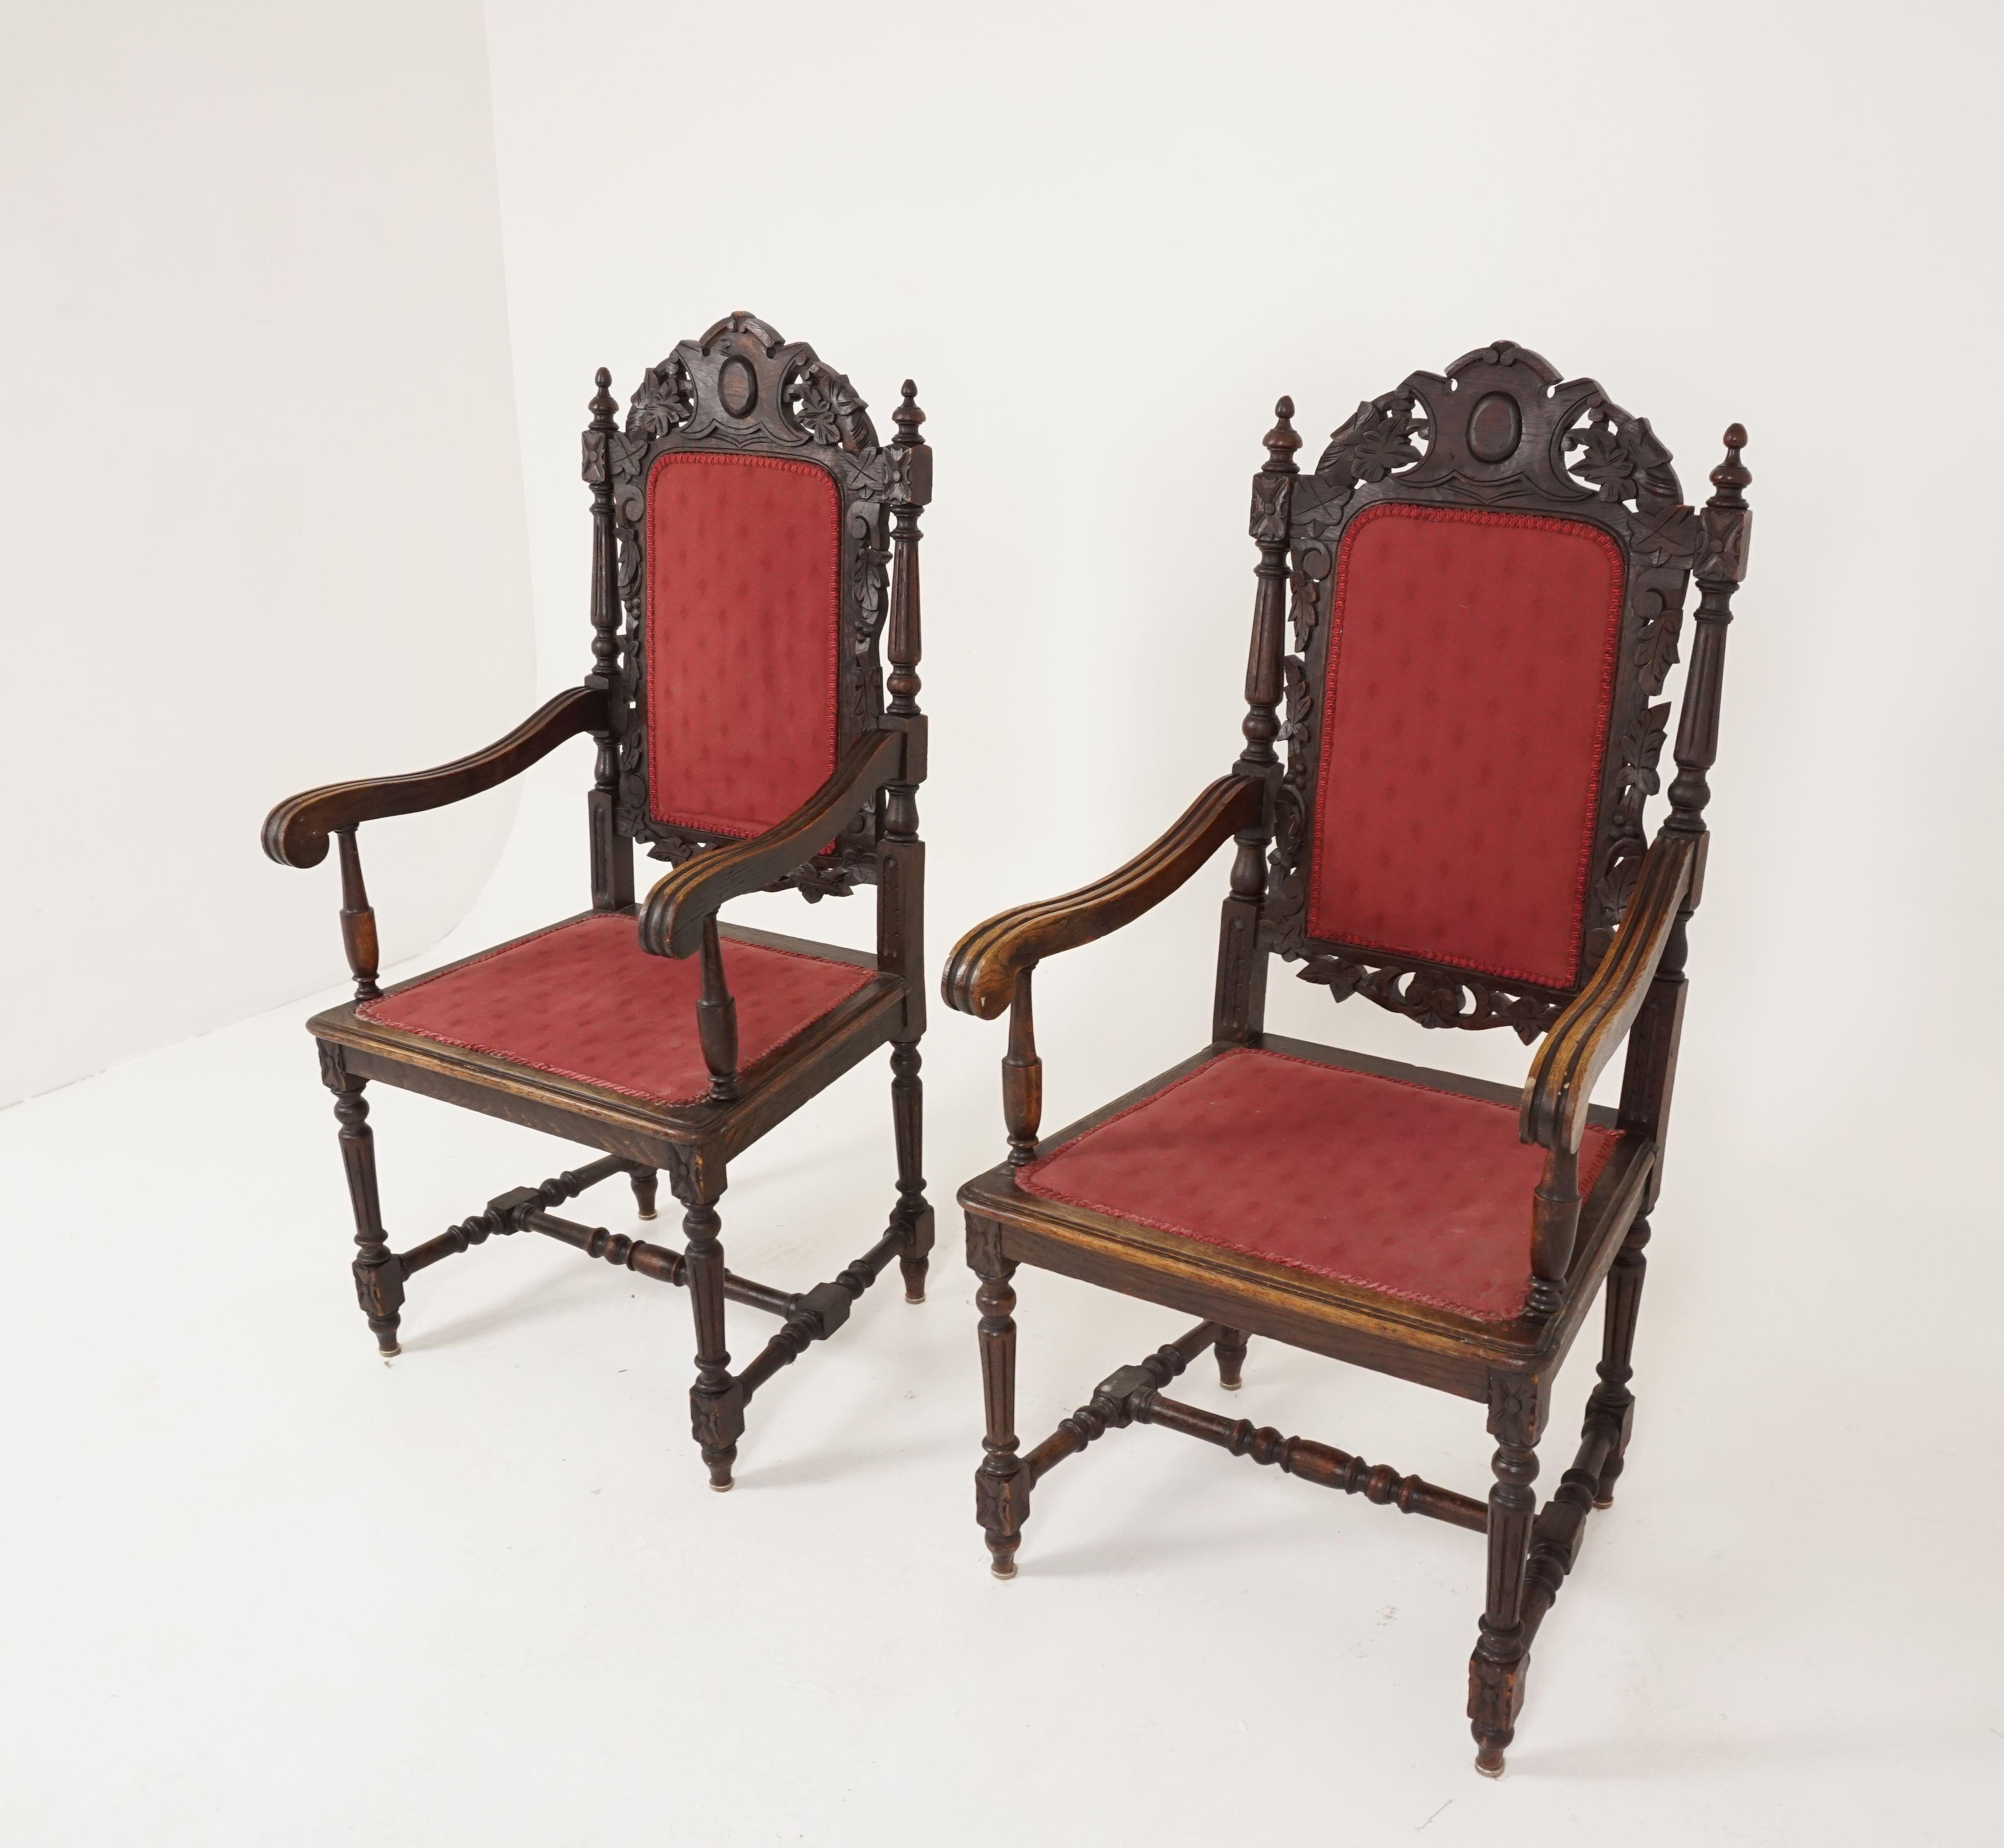 Antique pair of arm chairs, ornately hand carved oak, throne chairs, Scotland 1880, B2415

Scotland, 1880
Solid oak
Original finish
Carved top rail
With stylish uprights
Upholstered center splat and open fretwork on the back
Stylized shaped